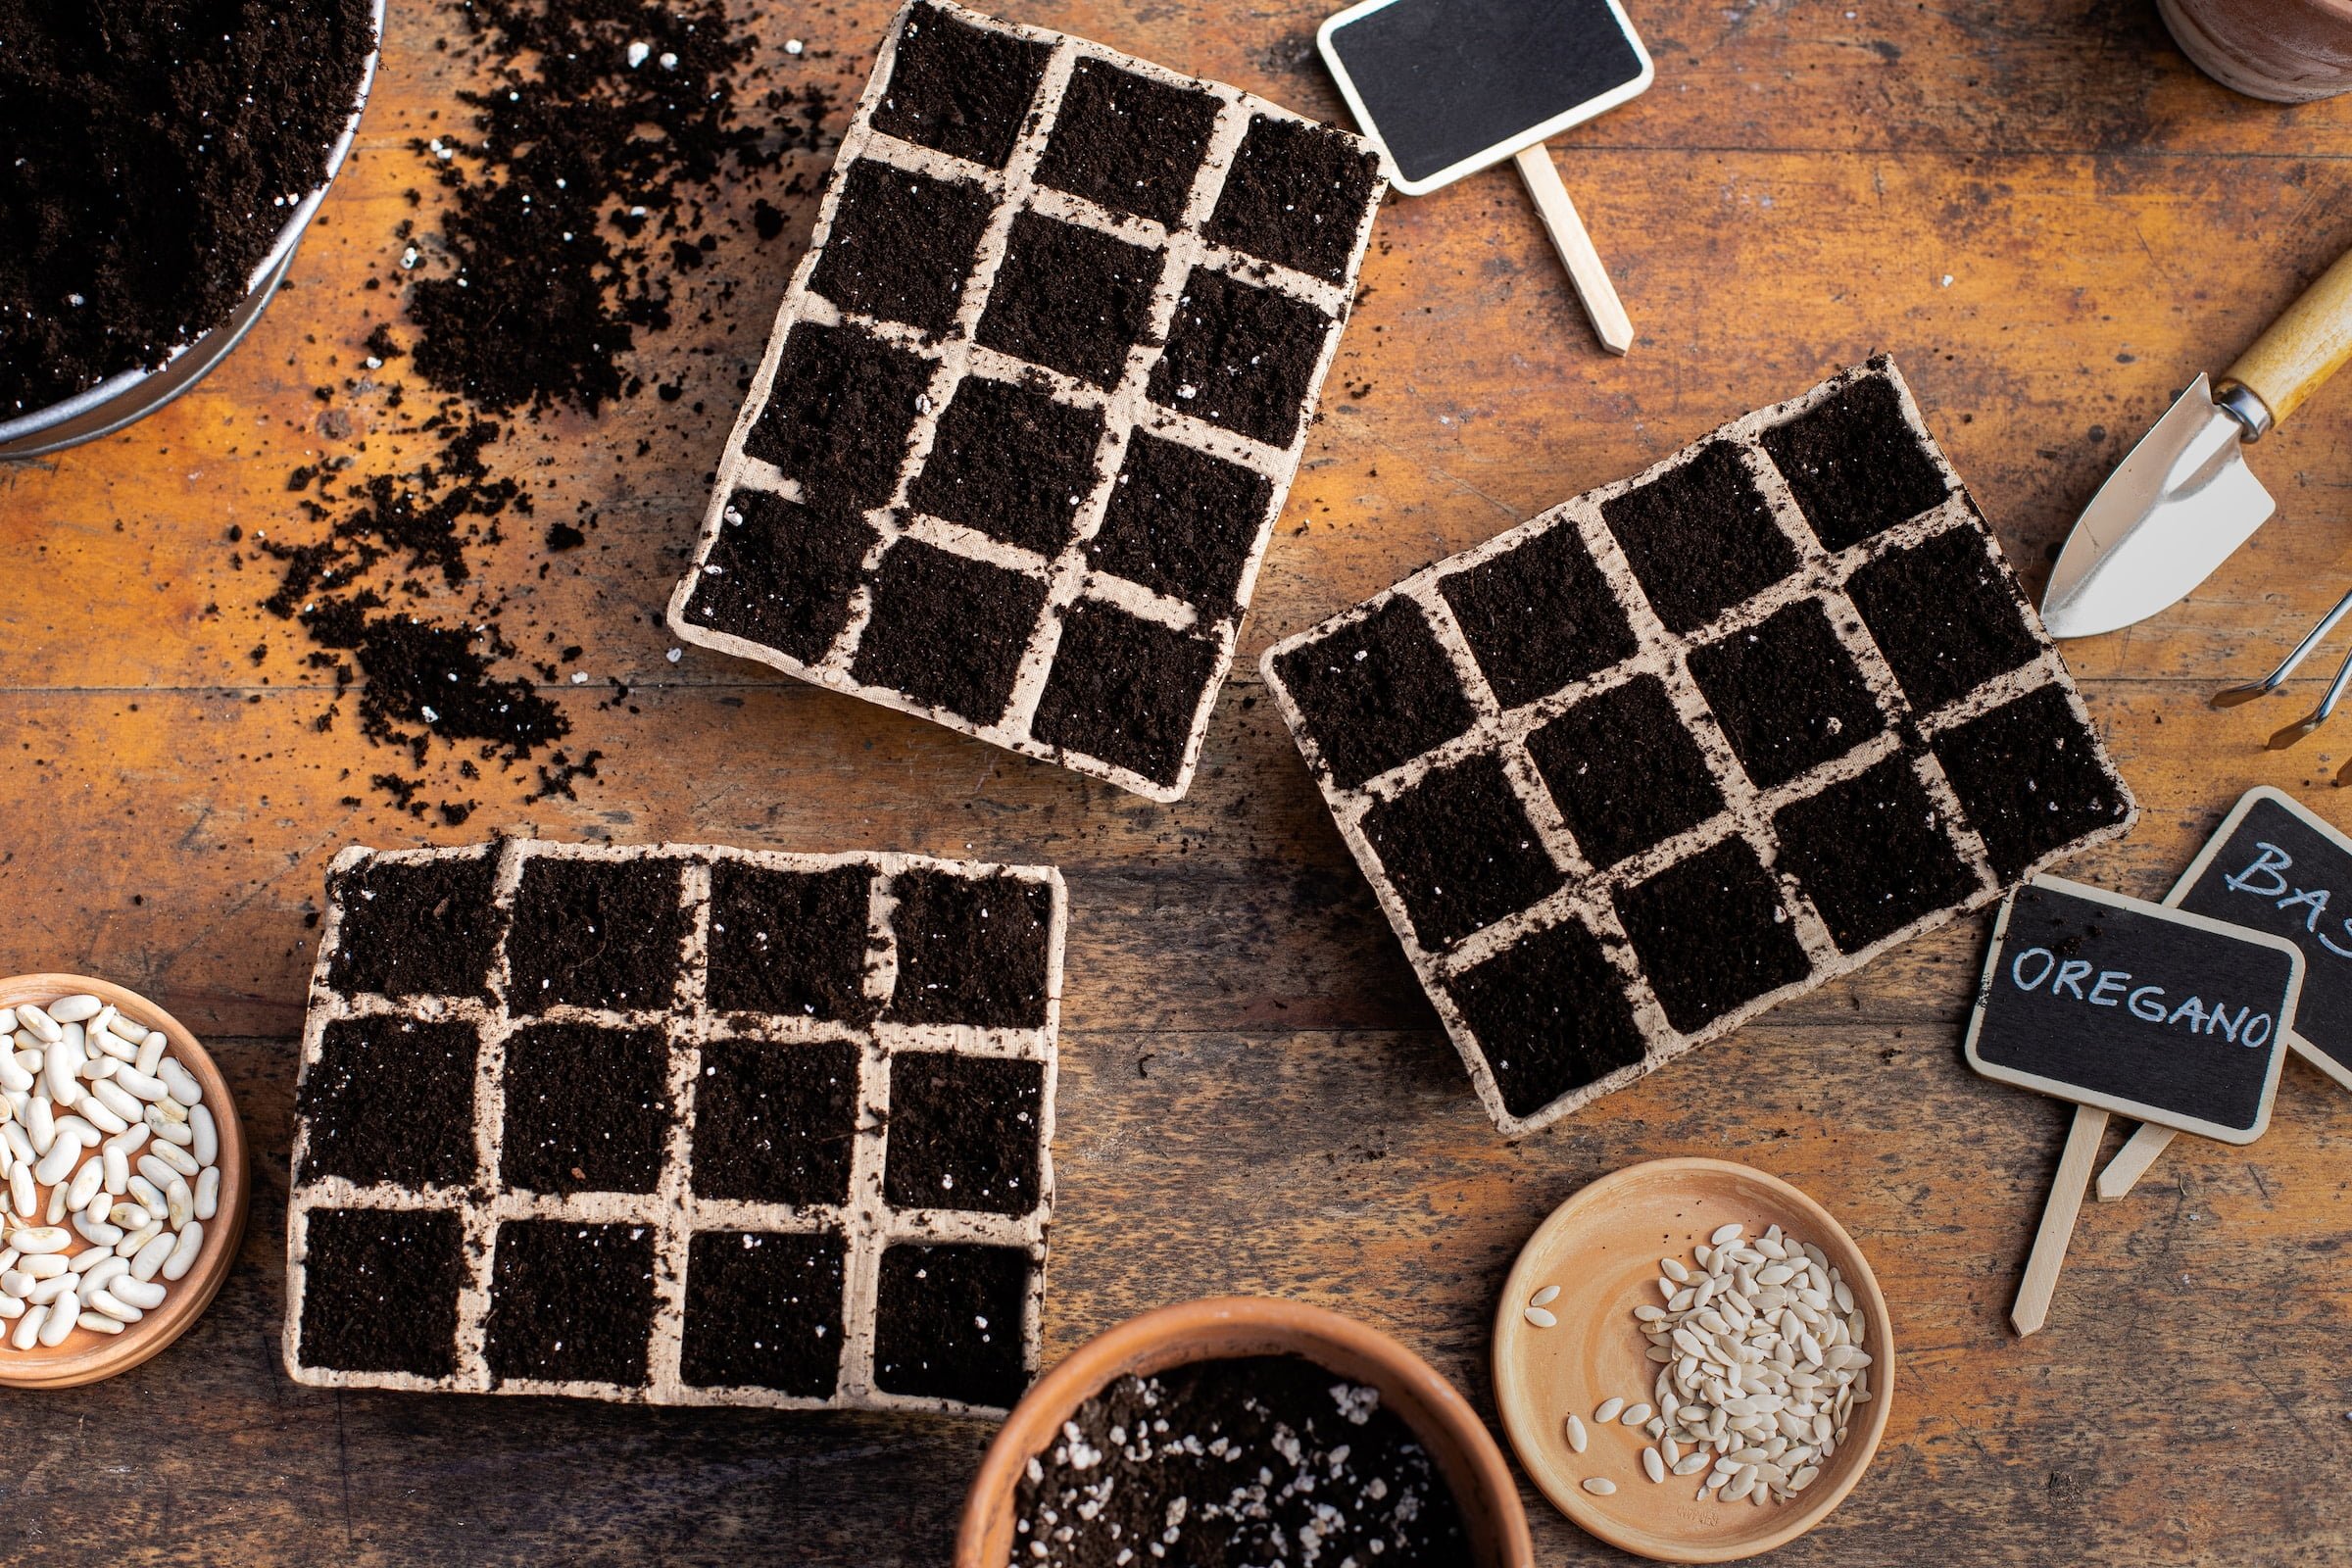 A comprehensive guide on sterilizing soil before planting seeds in seed trays on a wooden table.